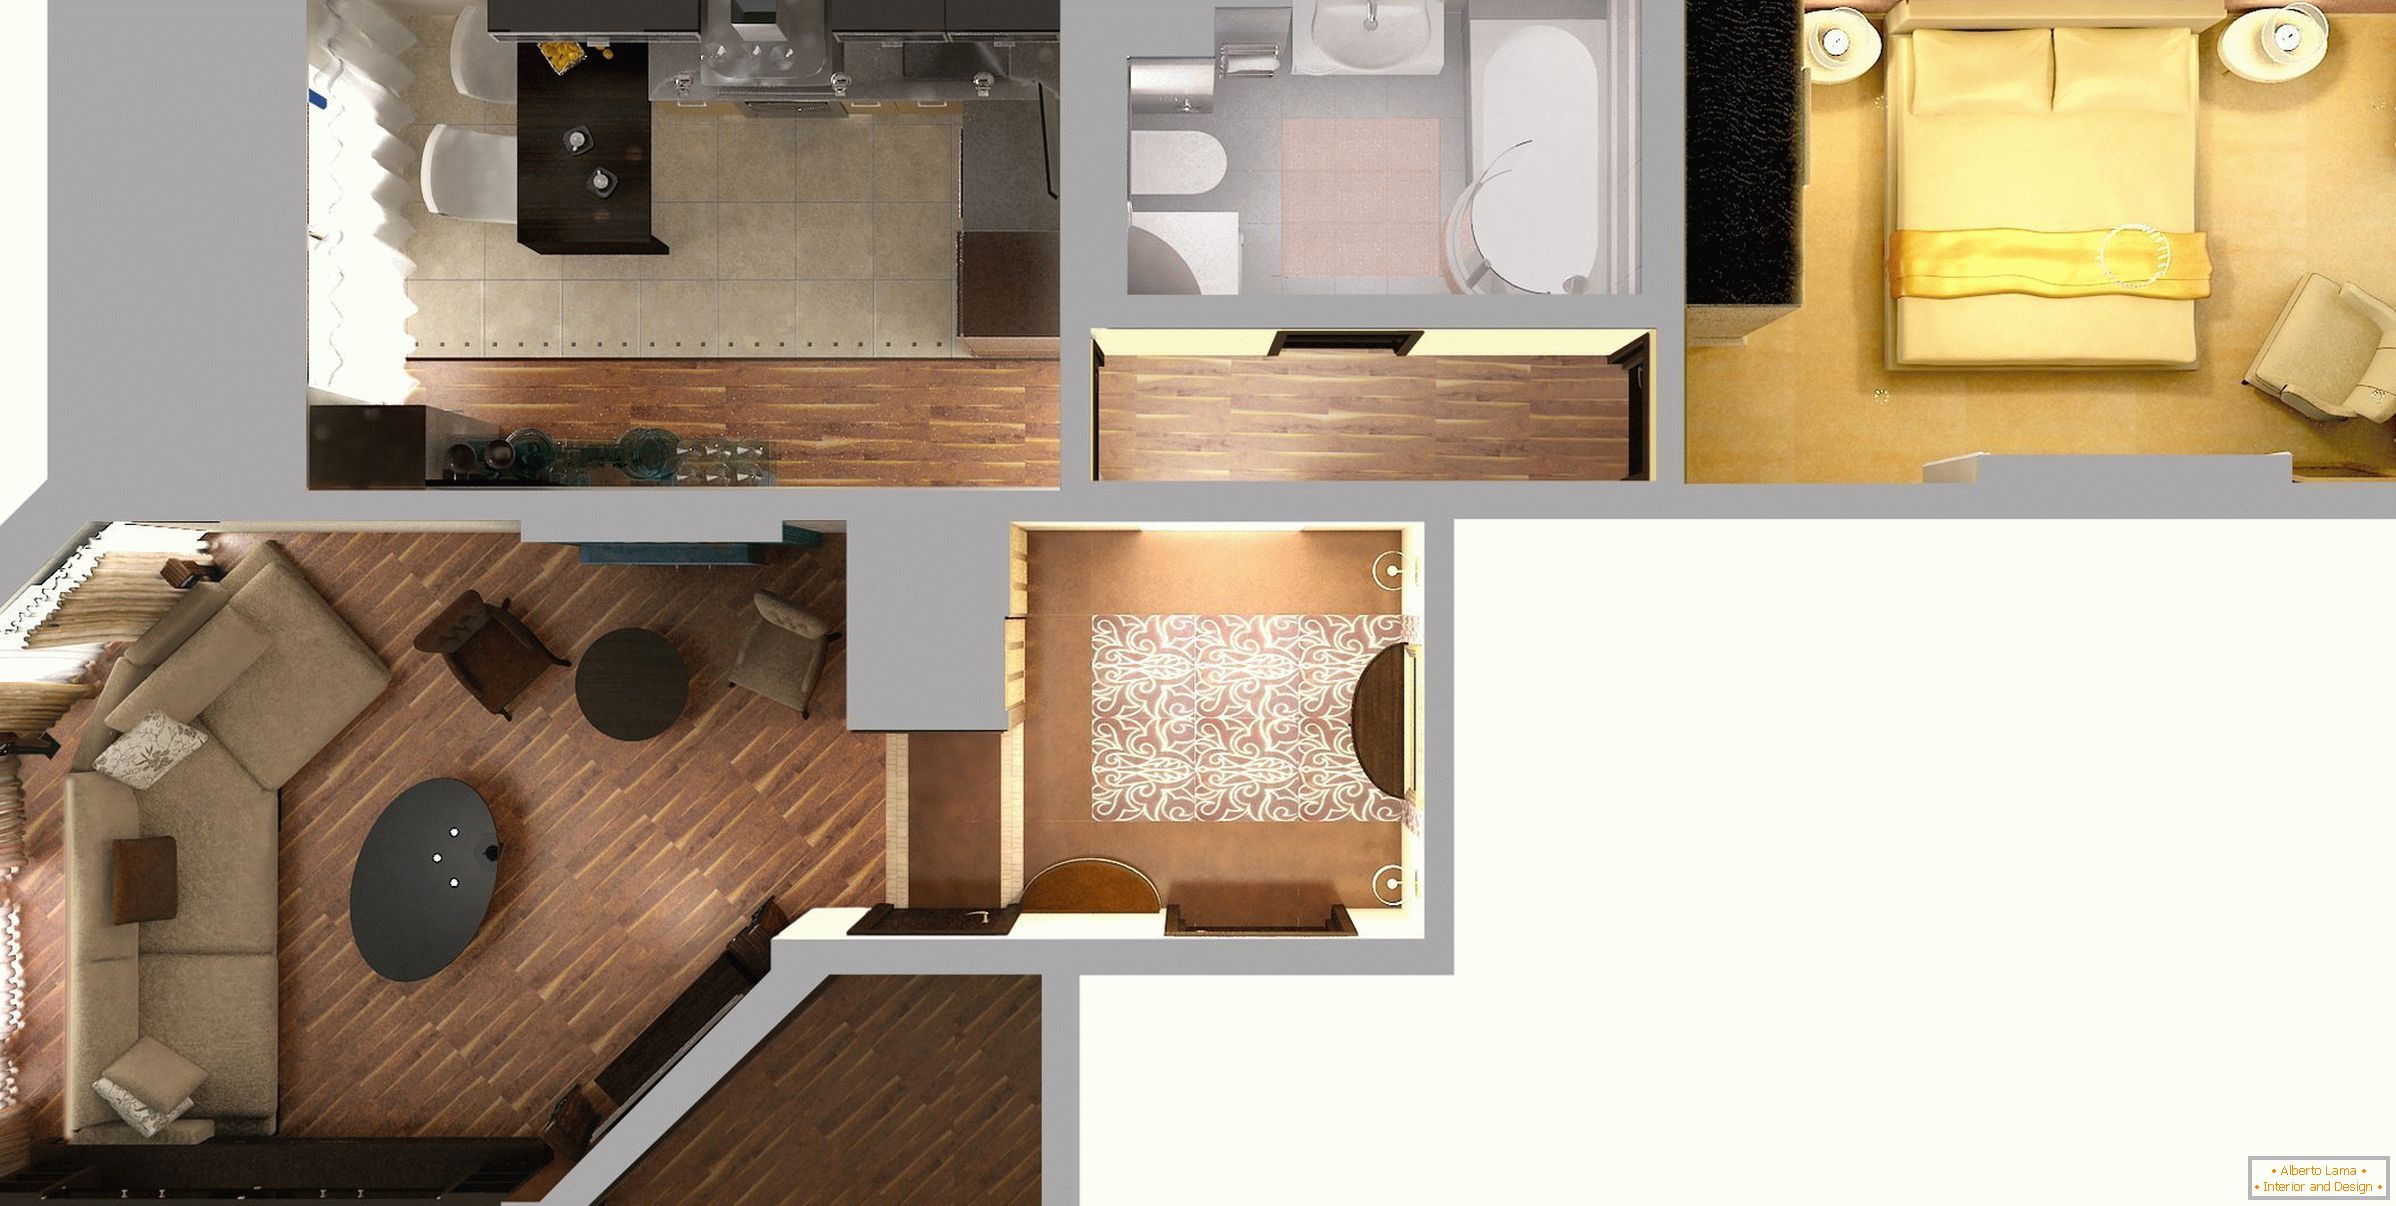 Through layout of a modern apartment